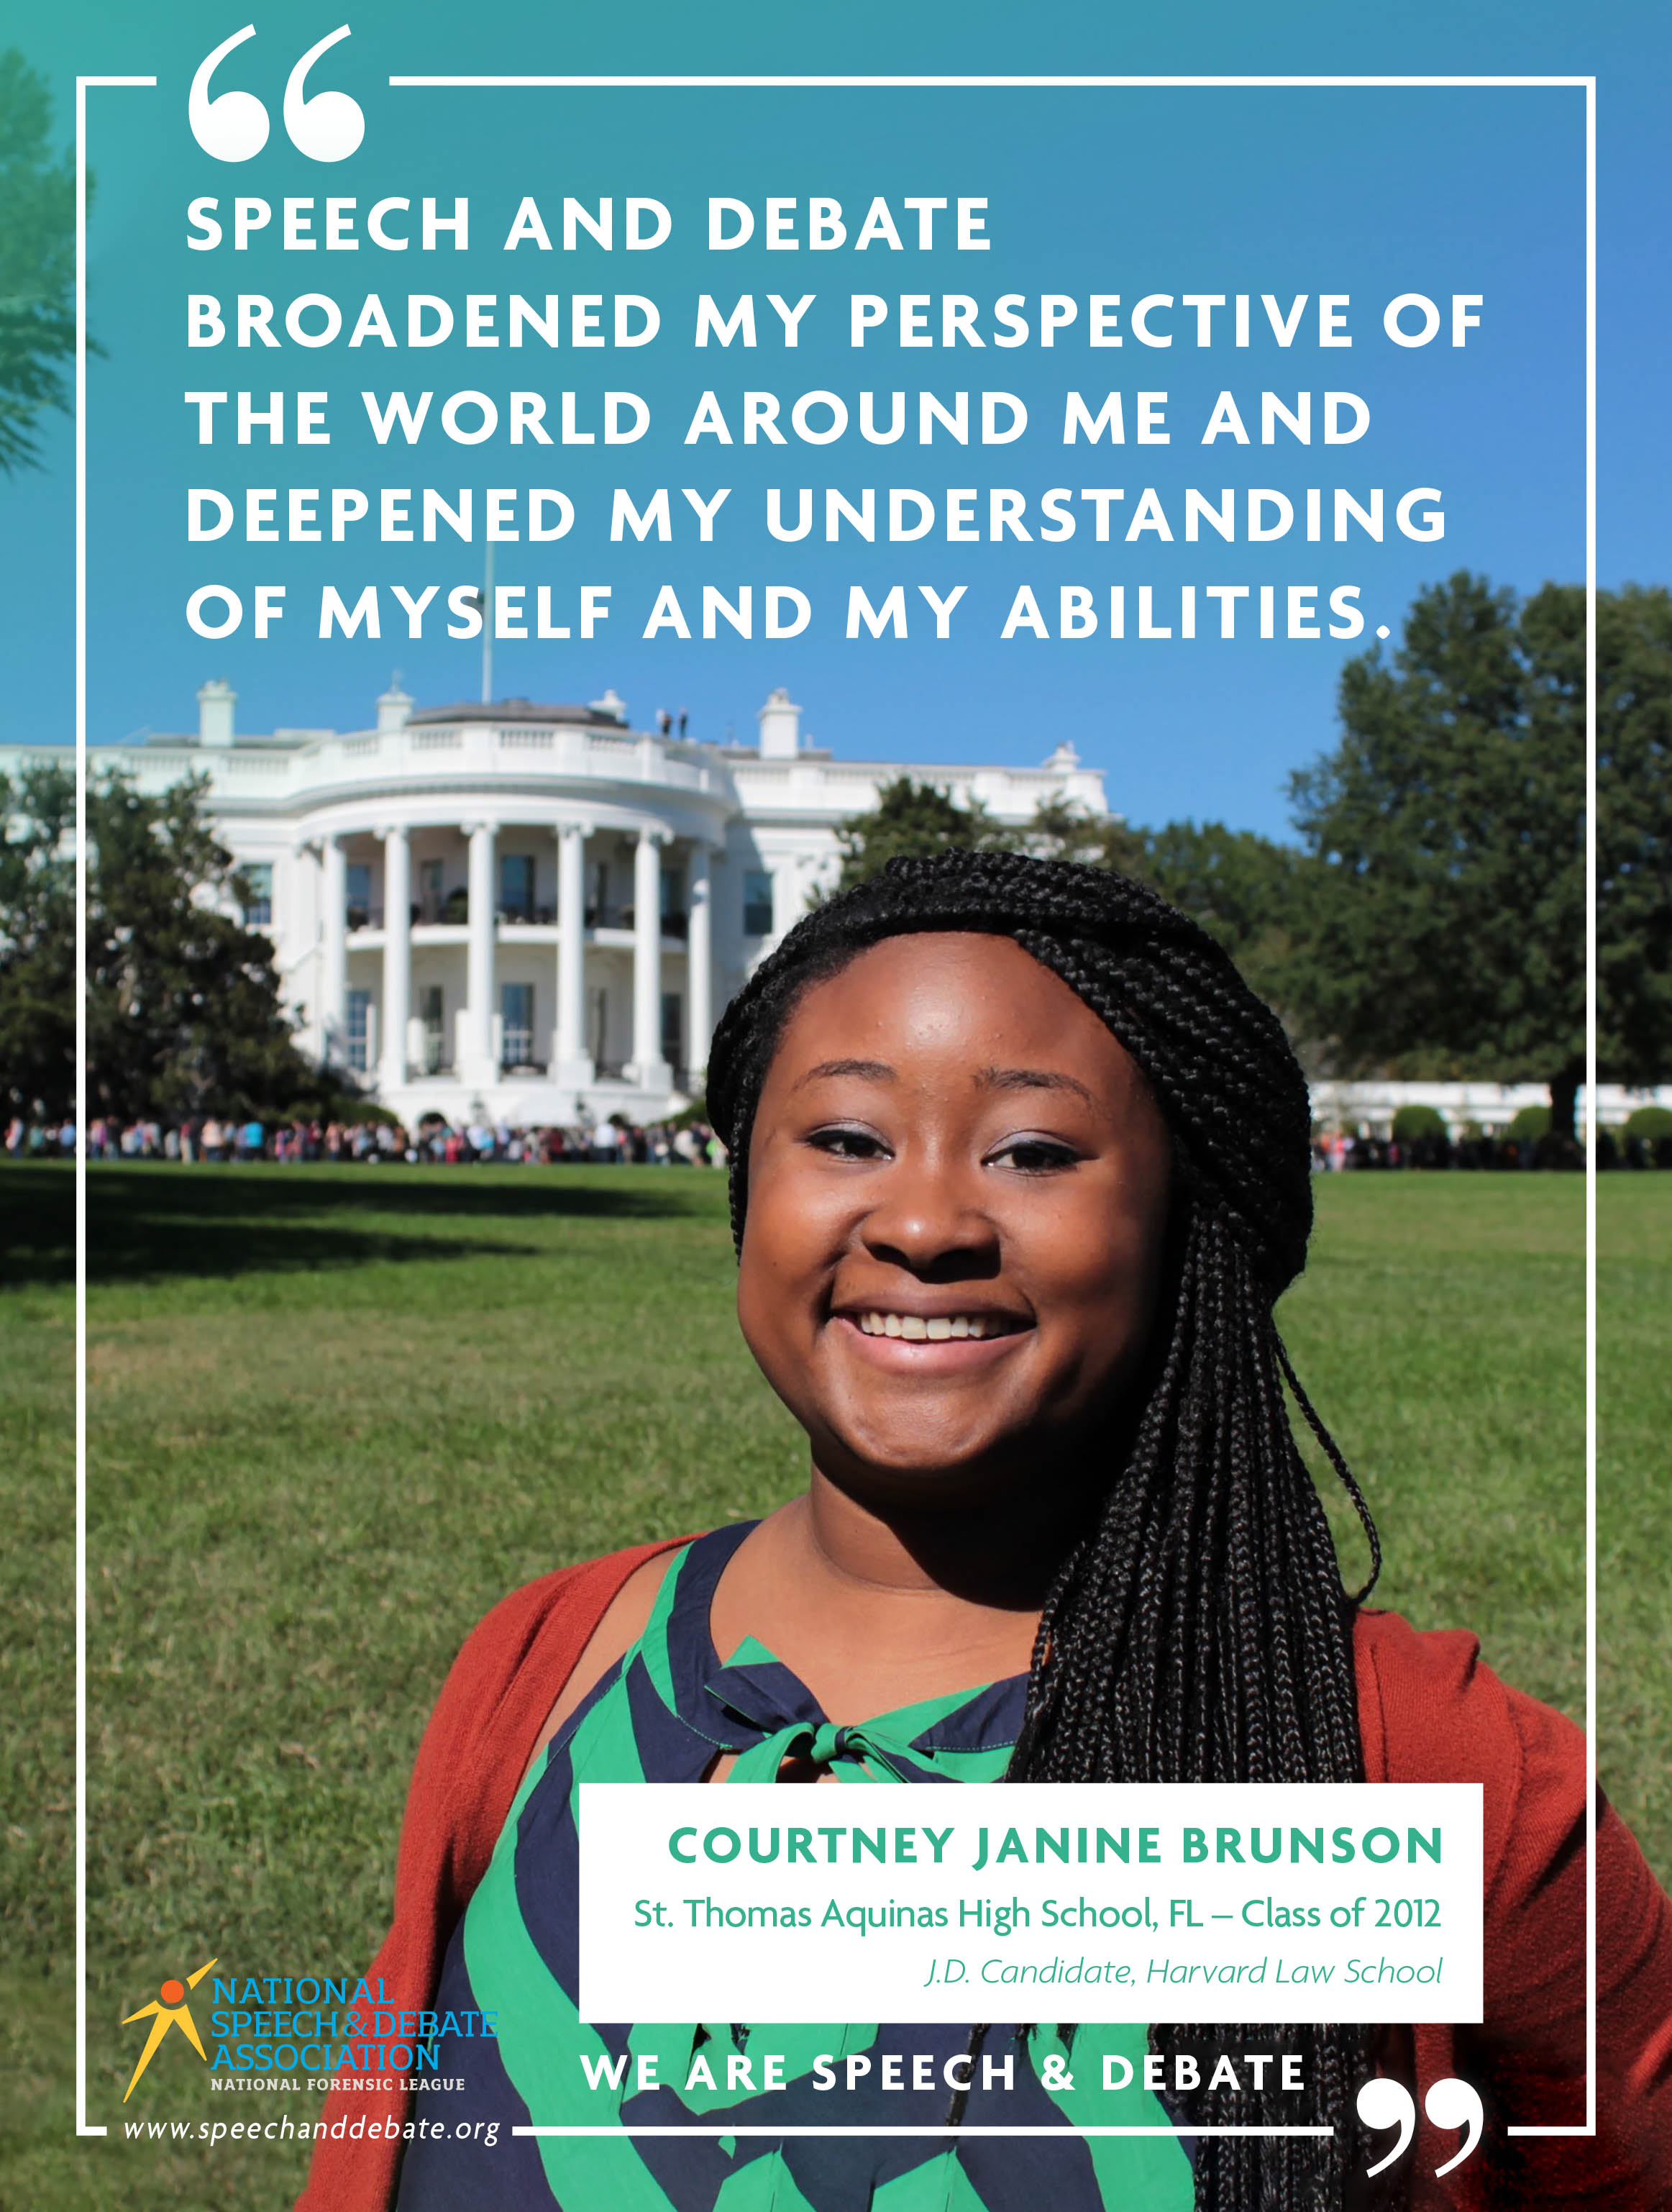 "SPEECH AND DEBATE BROADENED MY PERSPECTIVE OF THE WORLD AROUND ME AND DEEPENED MY UNDERSTANDING OF MYSELF AND MY ABILITIES." - COURTNEY JANINE BRUNSON